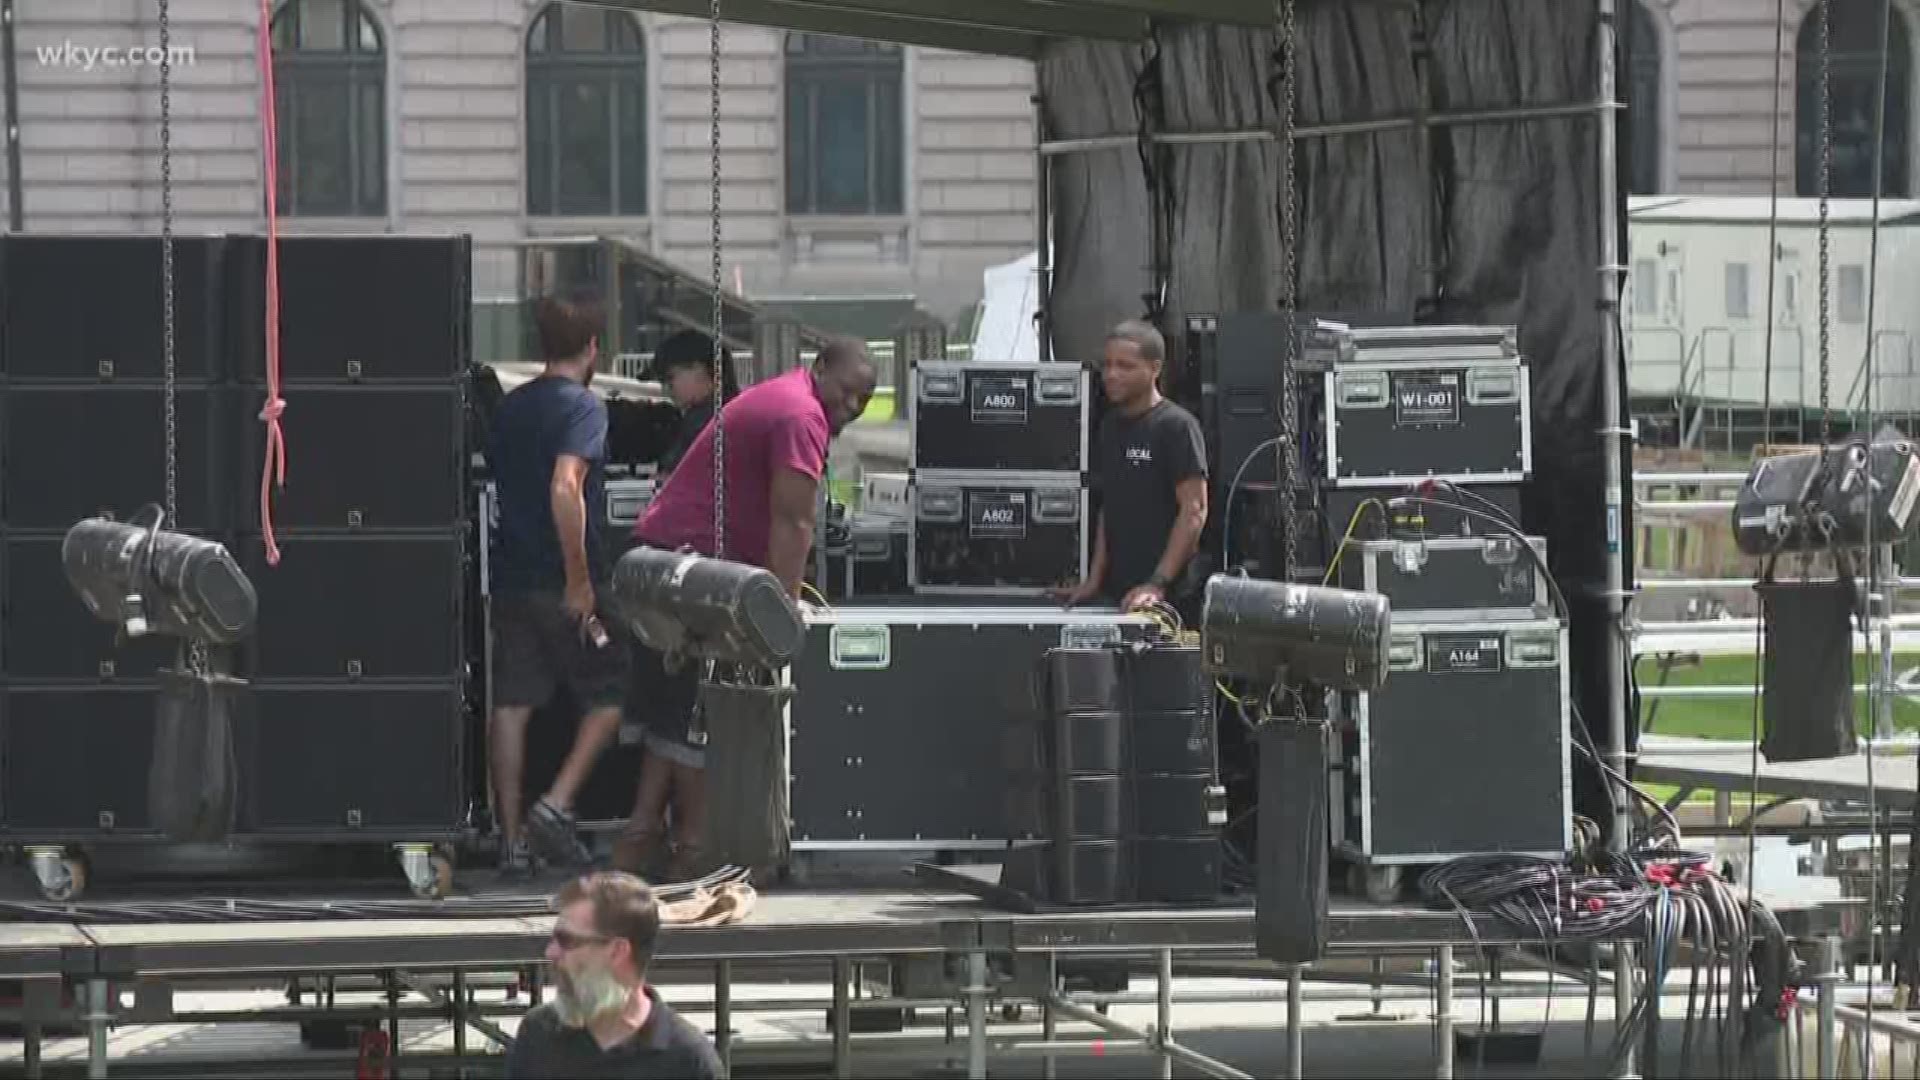 Preparations being made for inaugural InCuya Music Festival